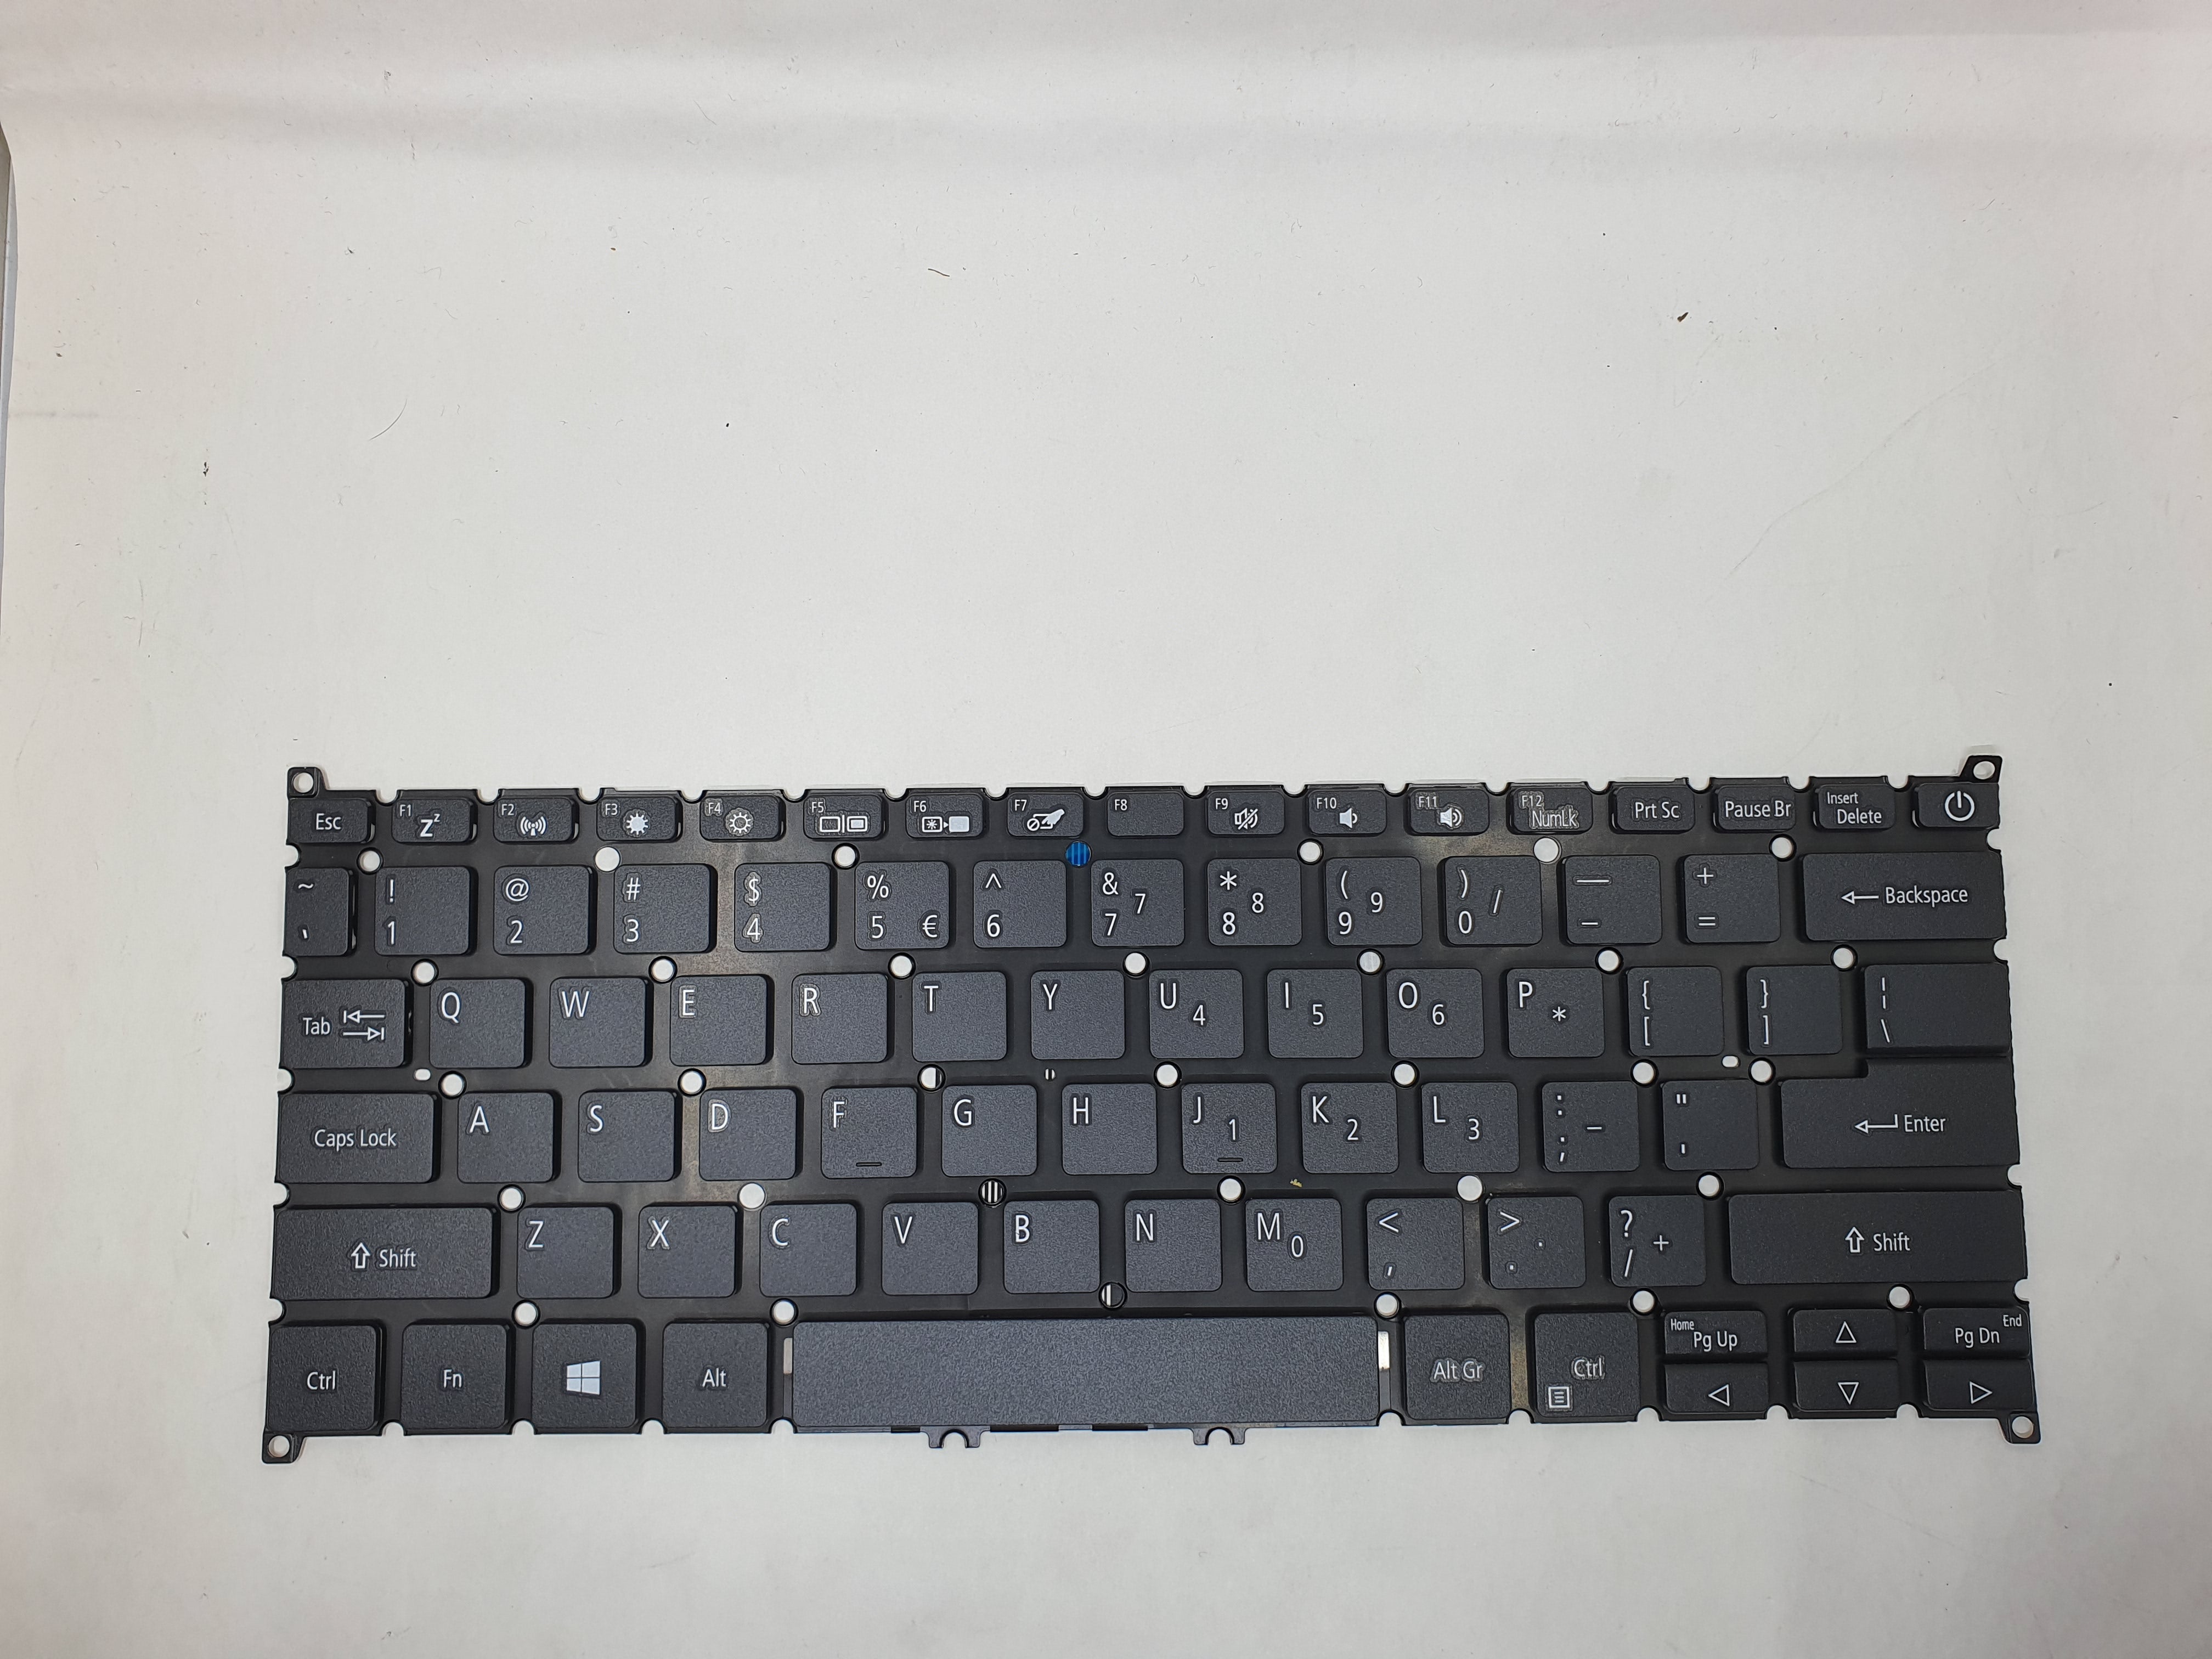 Acer Keyboard for Acer Swift 3 SF314-54